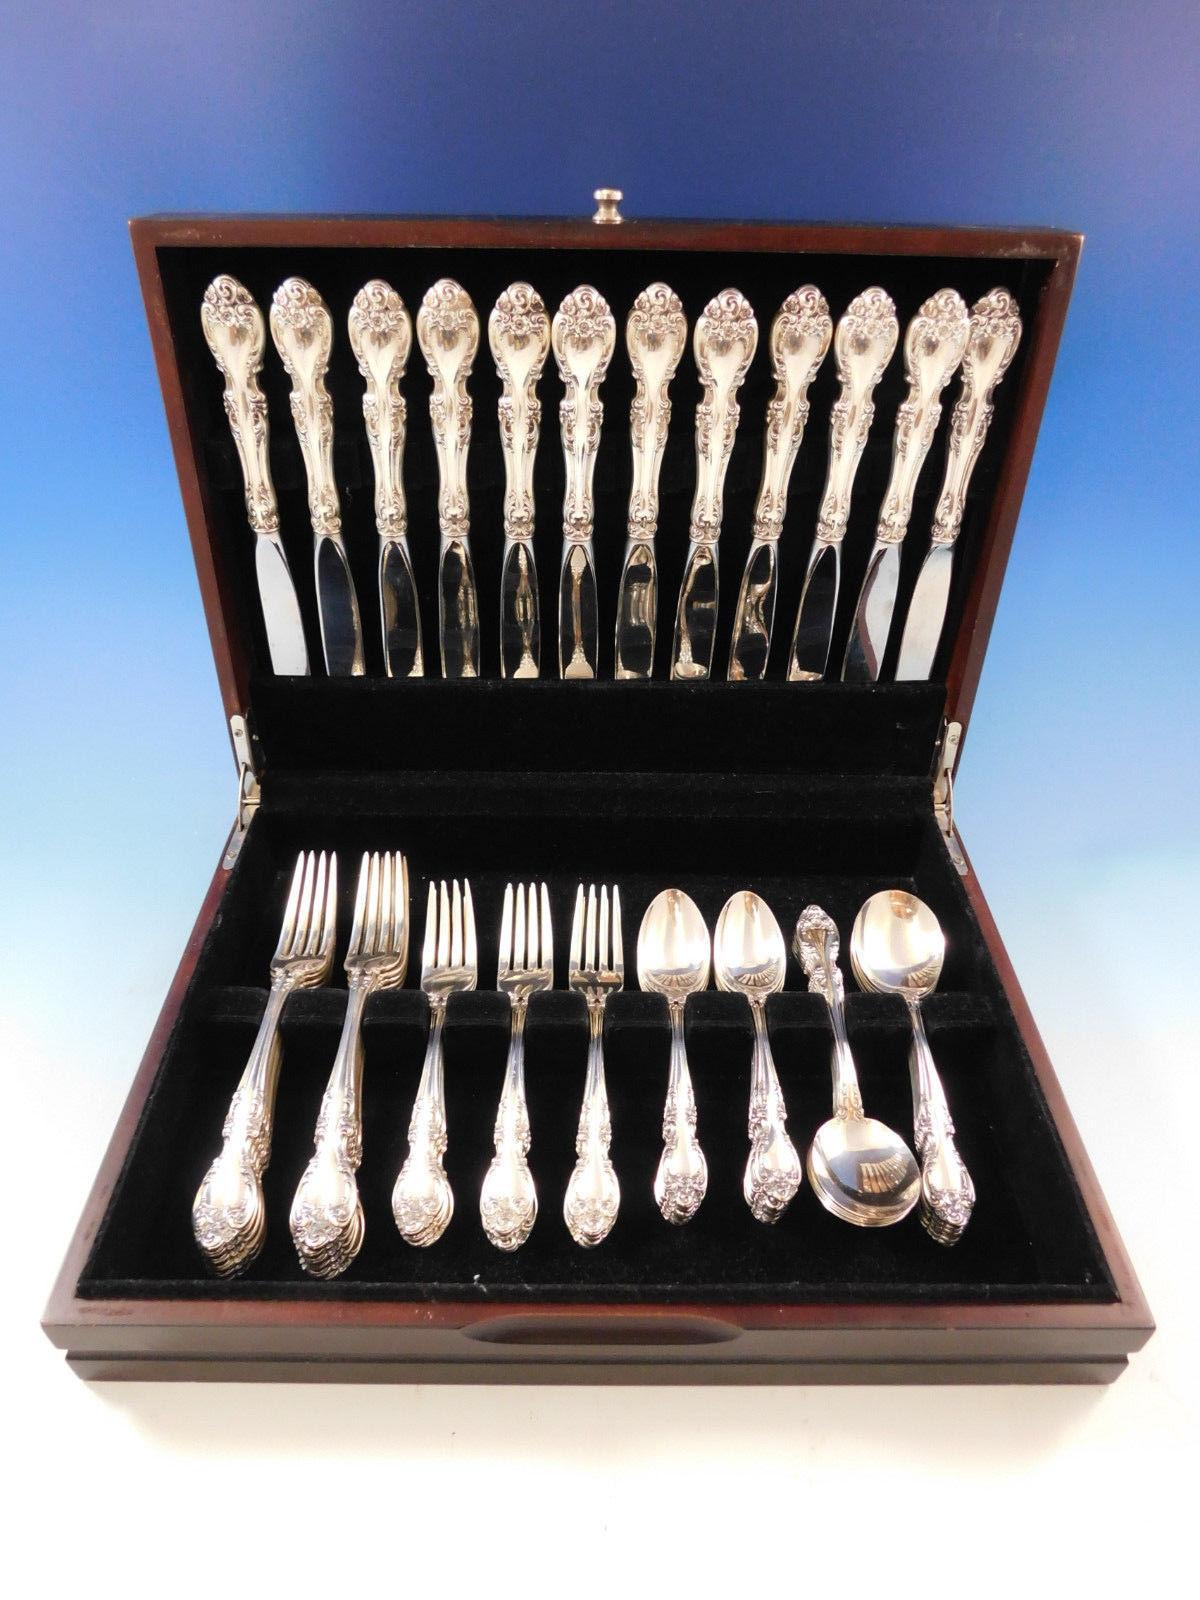 Melrose by Gorham sterling silver dinner size flatware set - 60 pieces. This set includes:

12 dinner knives, 9 1/2